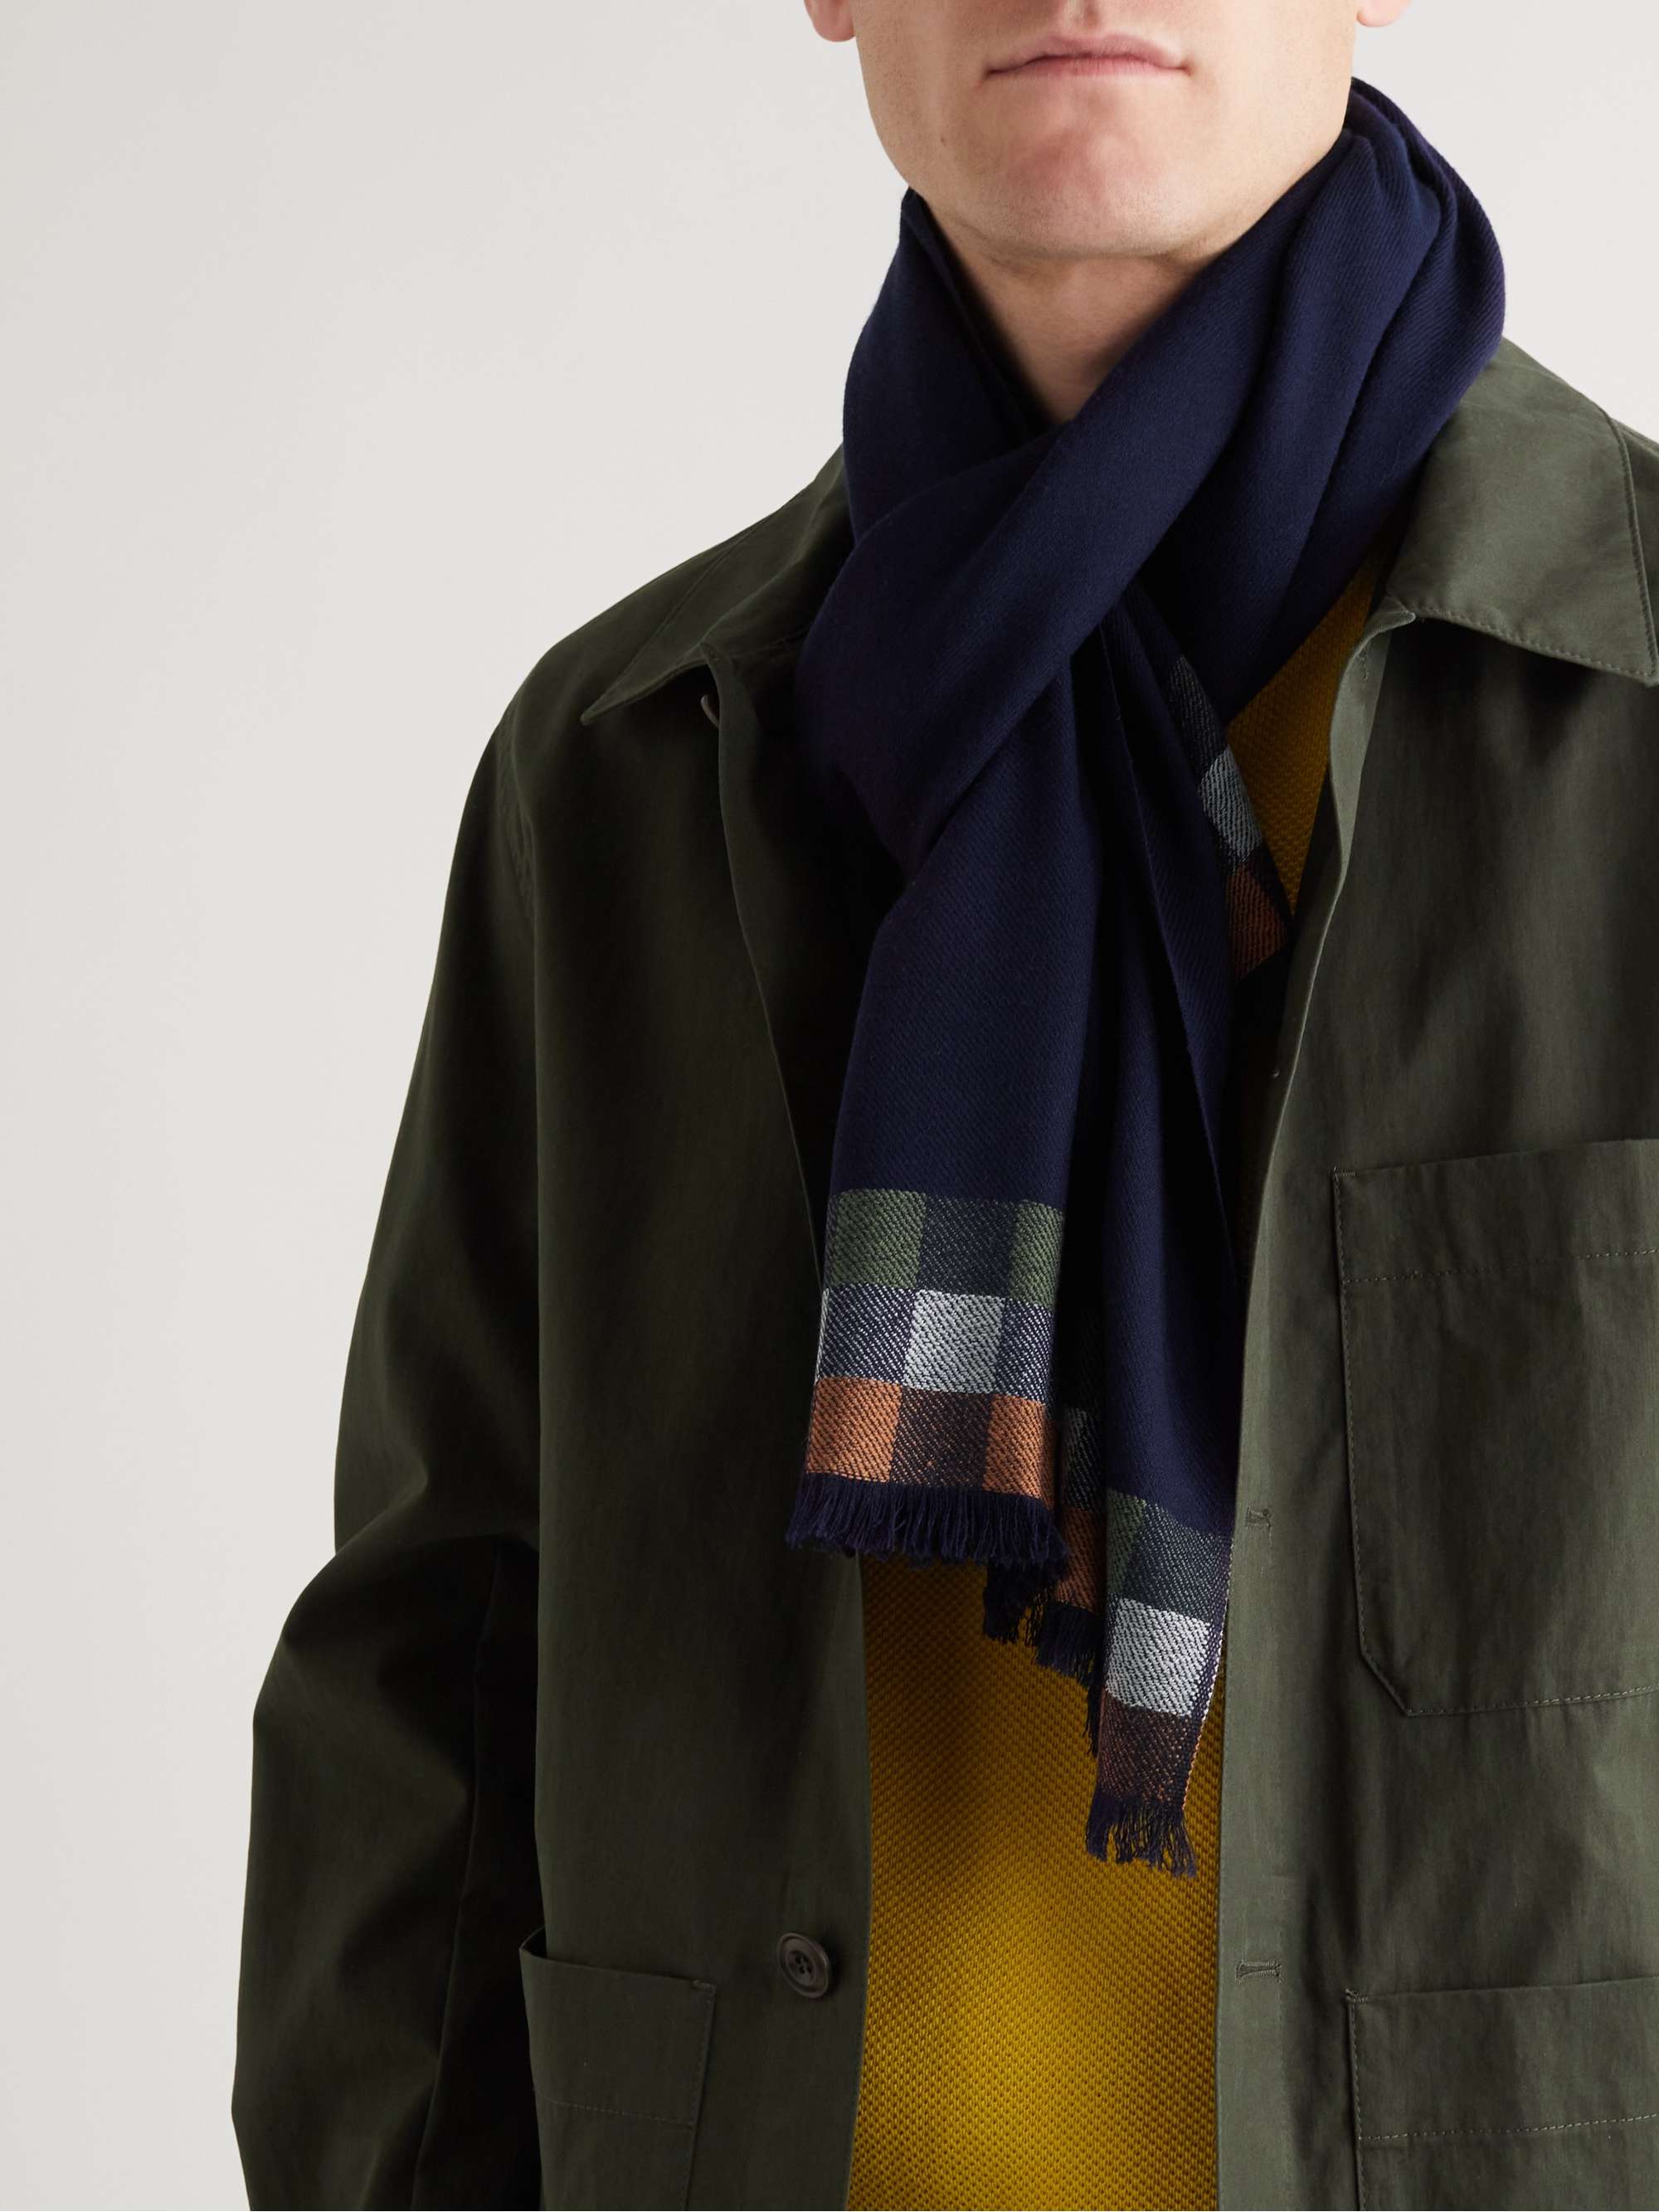 PAUL SMITH Fringed Checked Wool and Cashmere-Blend Scarf